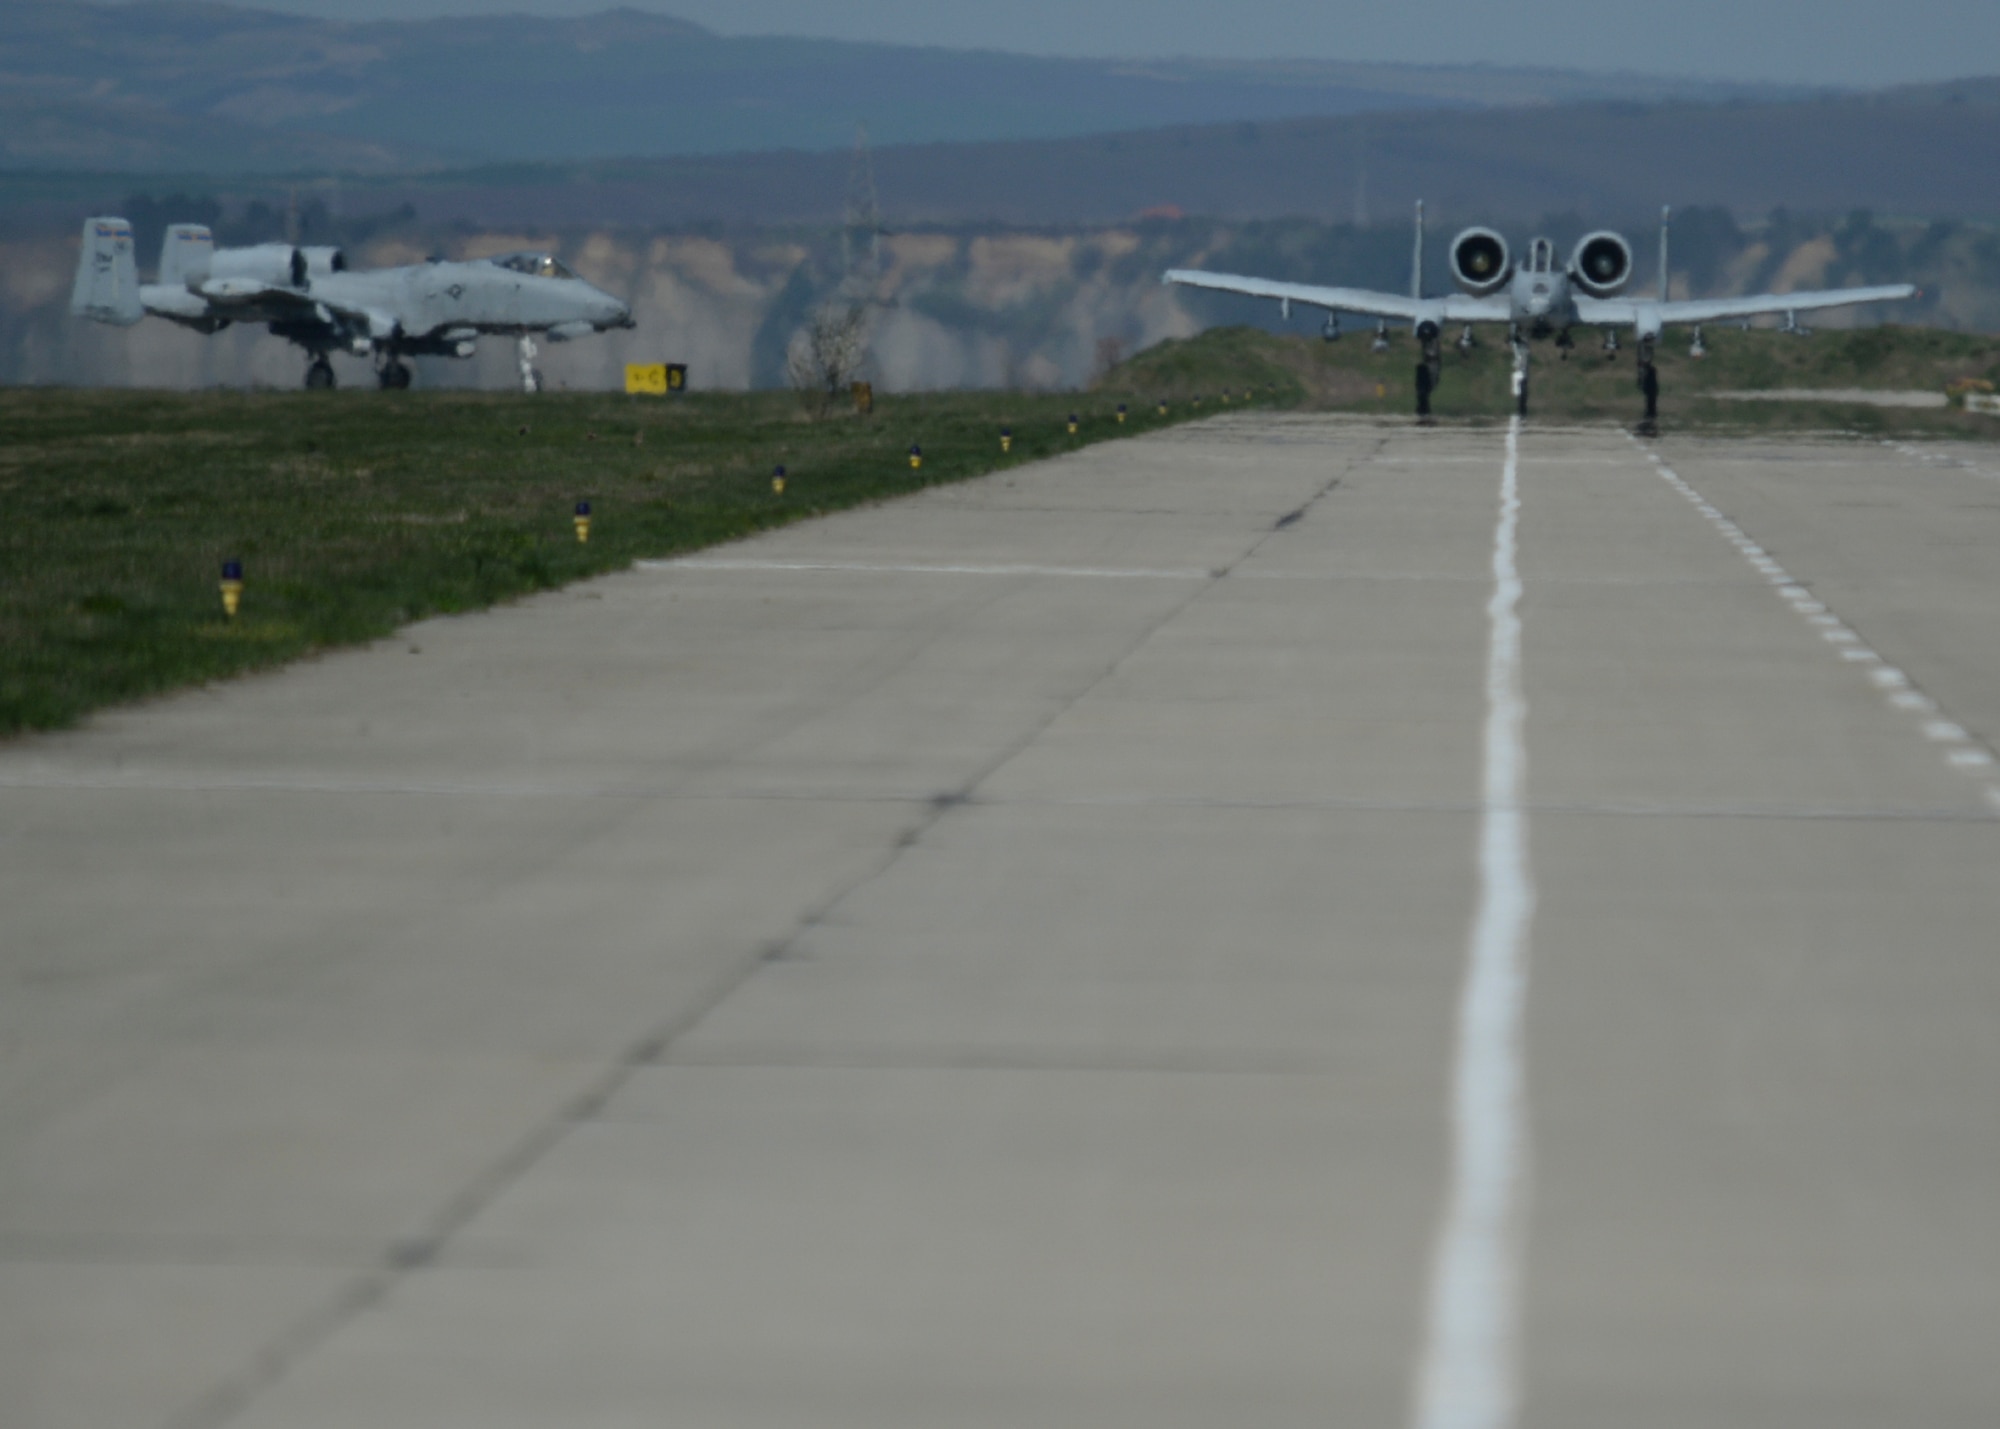 Two U.S. Air Force A-10 Thunderbolt II aircraft assigned to the 354th Expeditionary Fighter Squadron taxi on the runway during a theater security package deployment at Campia Turzii, Romania, April 14, 2015. U.S. Airmen will conduct training alongside NATO allies to strengthen interoperability and demonstrate U.S. commitment to the security and stability of Europe. (U.S. Air Force photo by Staff Sgt. Joe W. McFadden/Released)